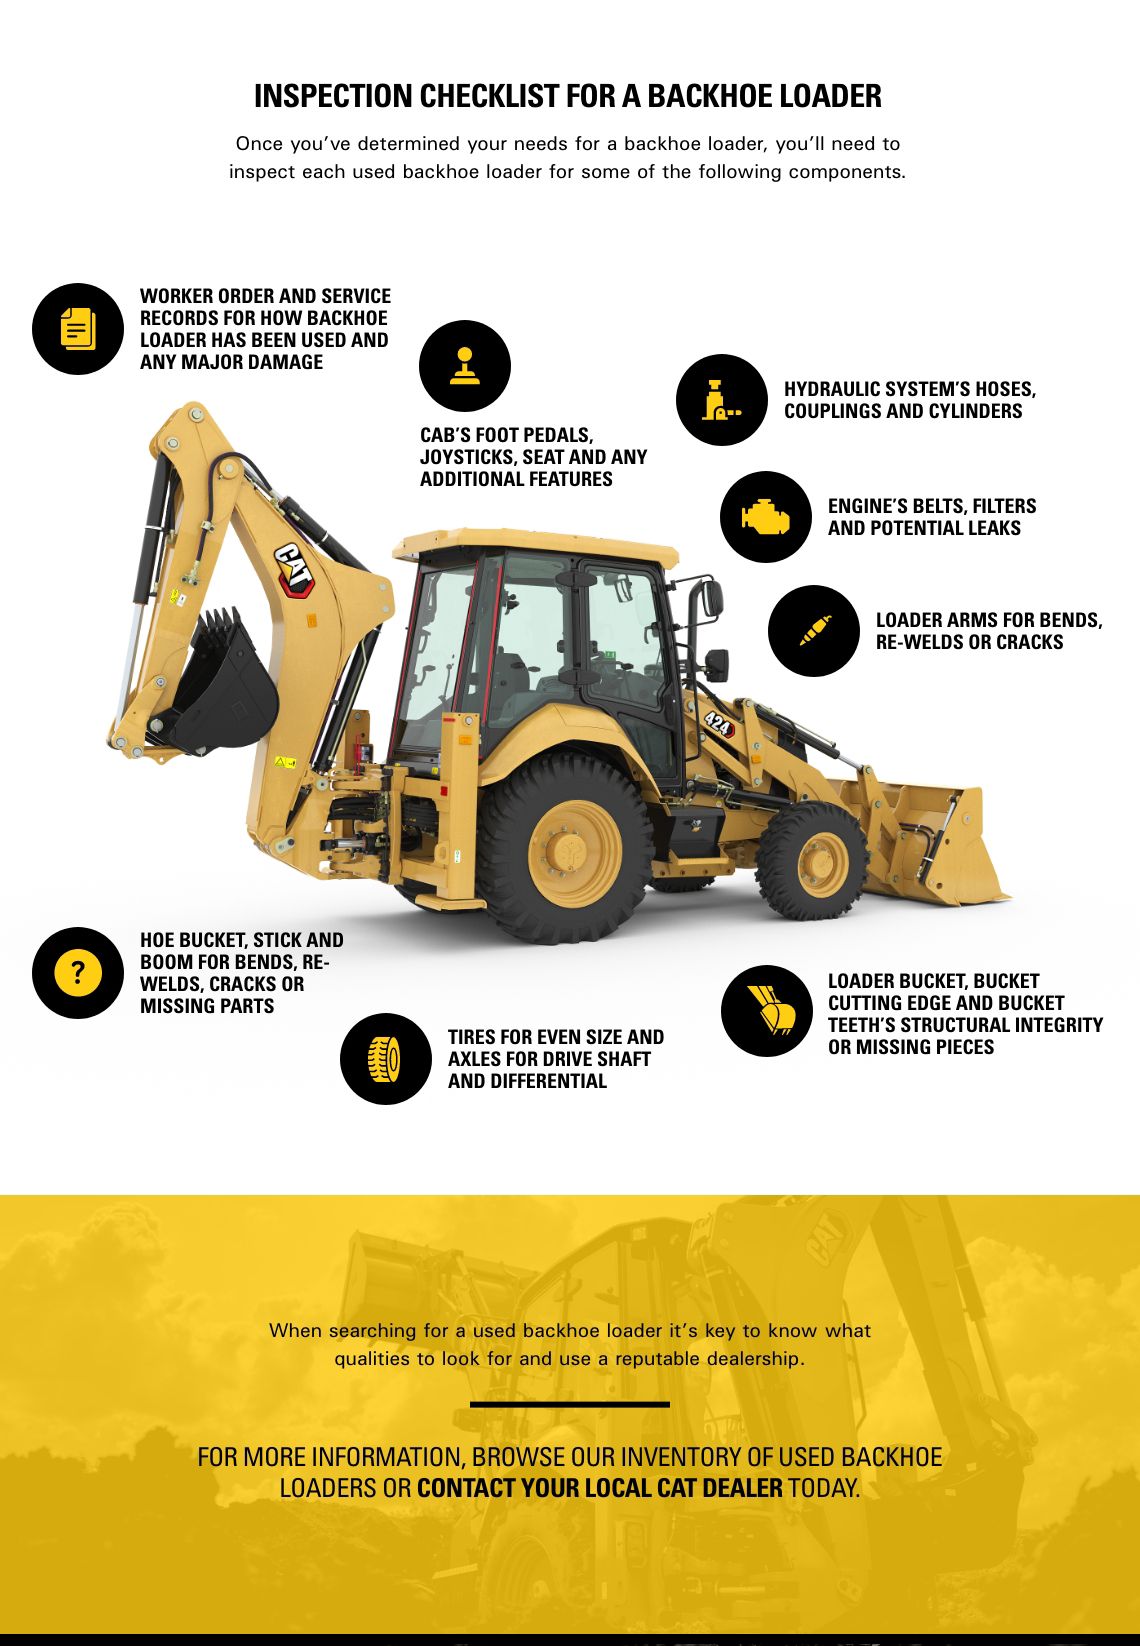 8 Tips & What to Look For When Buying a Used Backhoe Loader